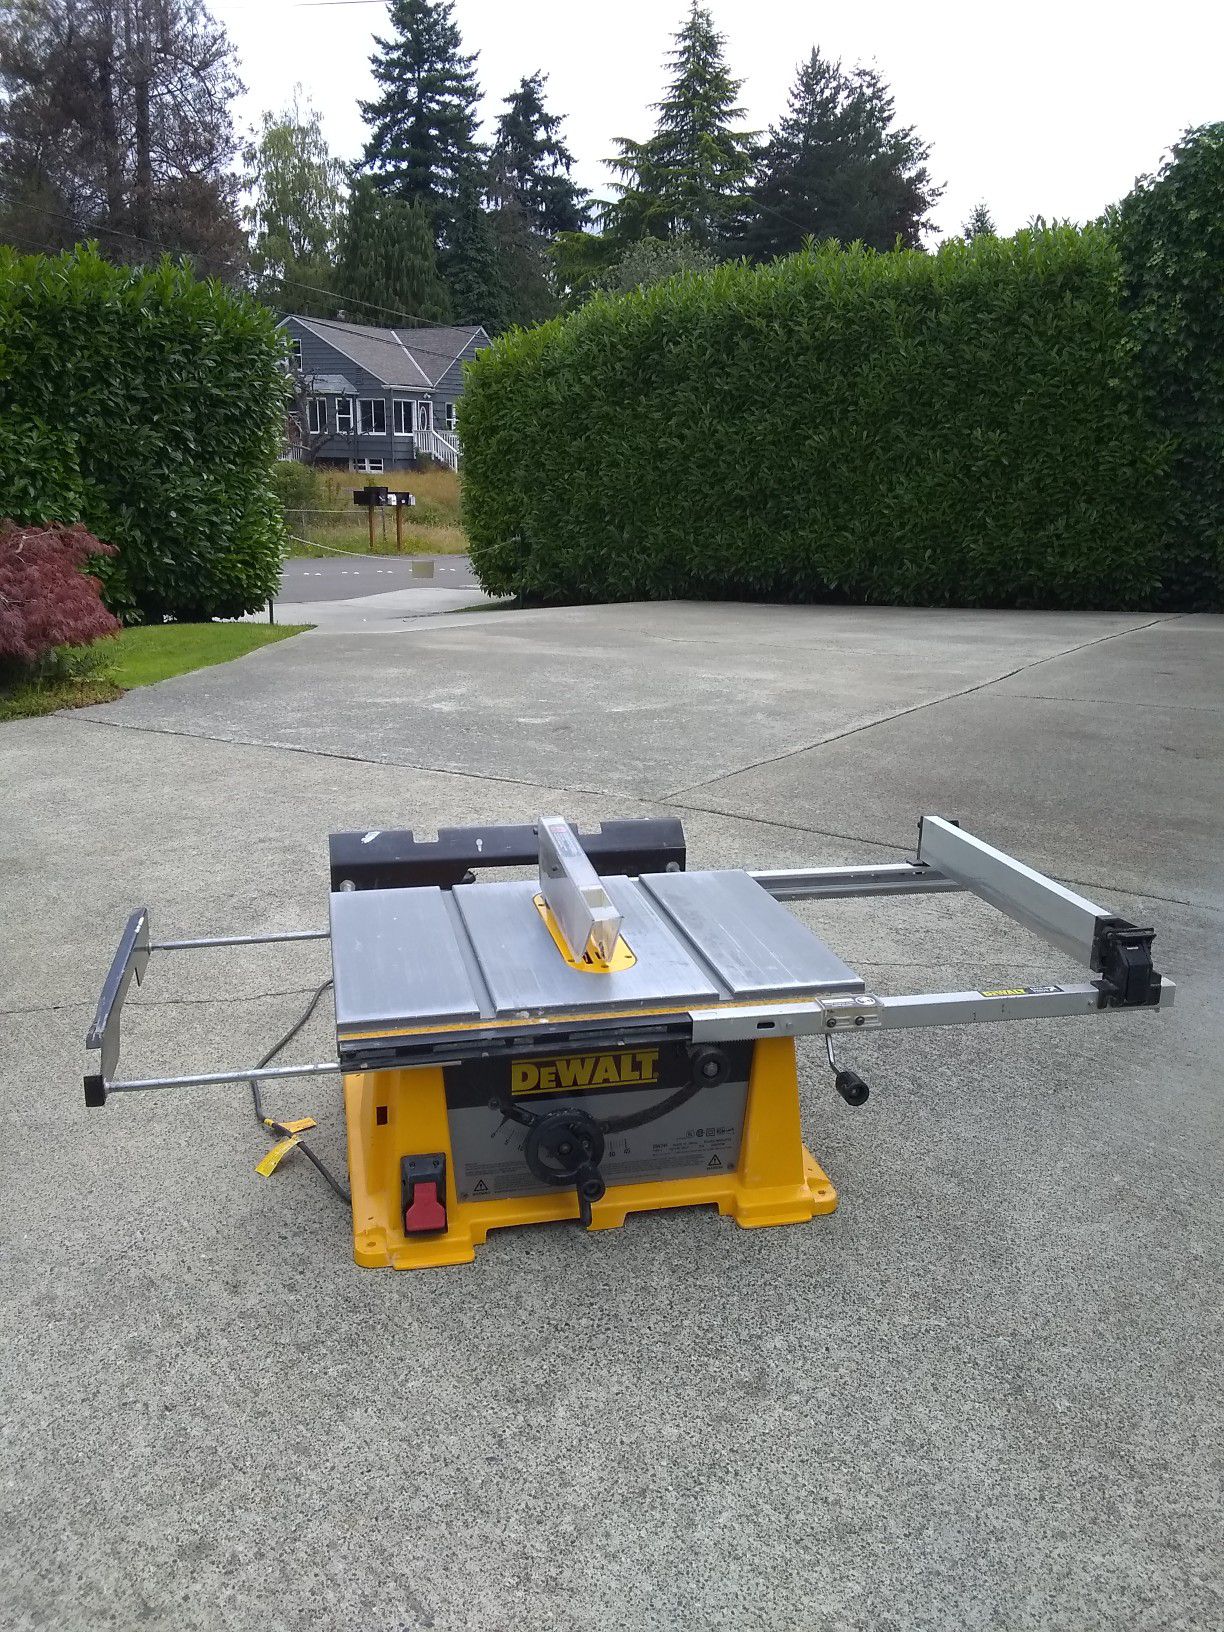 DEWALT 10" TABLE SAW • EXCELLENT WORKING CONDITION ★ $195 FIRM NO OFFERS ★